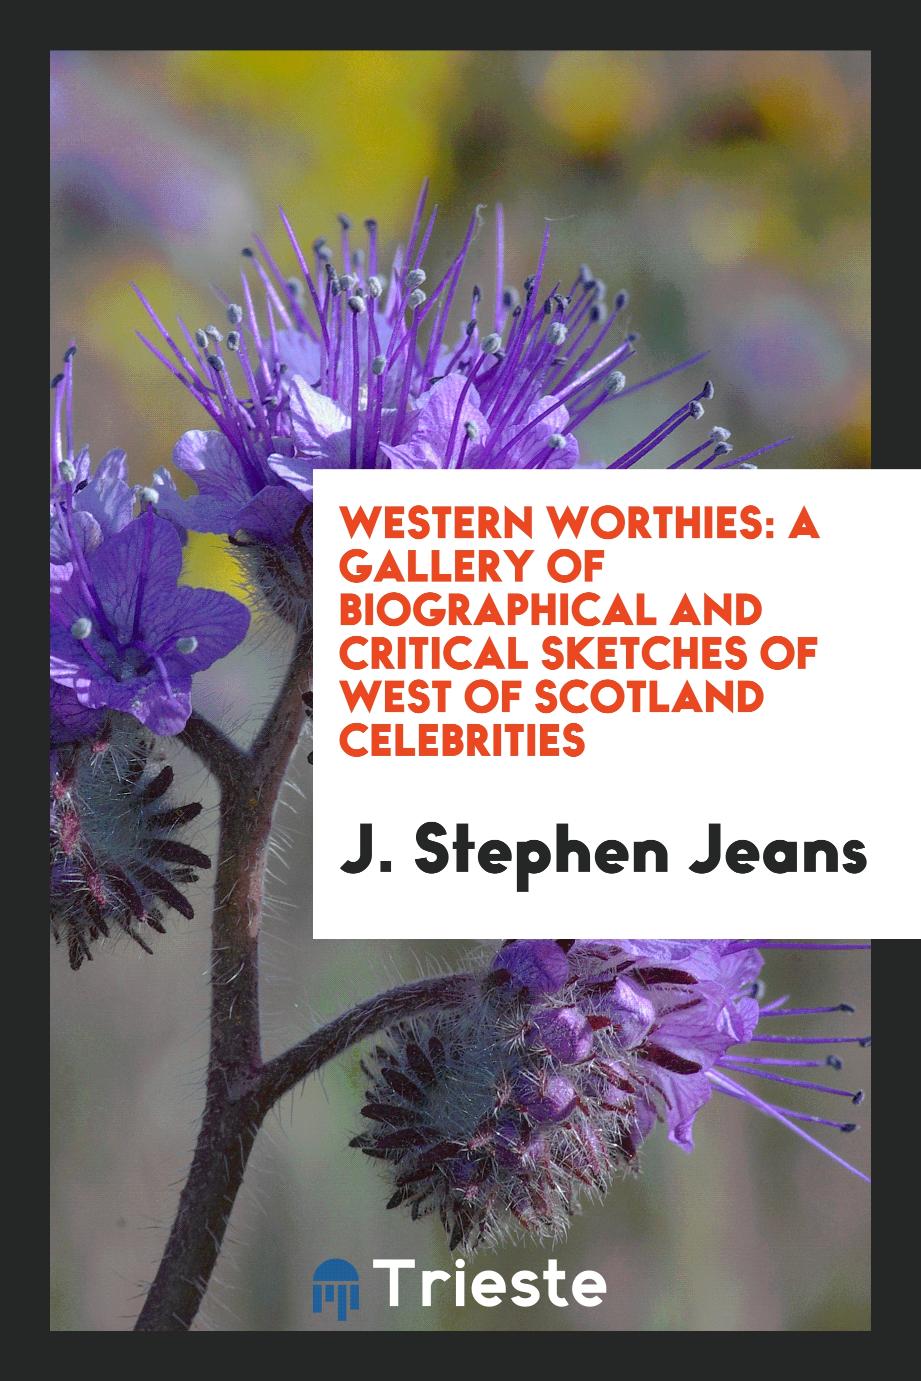 Western Worthies: A Gallery of Biographical and Critical Sketches of West of Scotland Celebrities